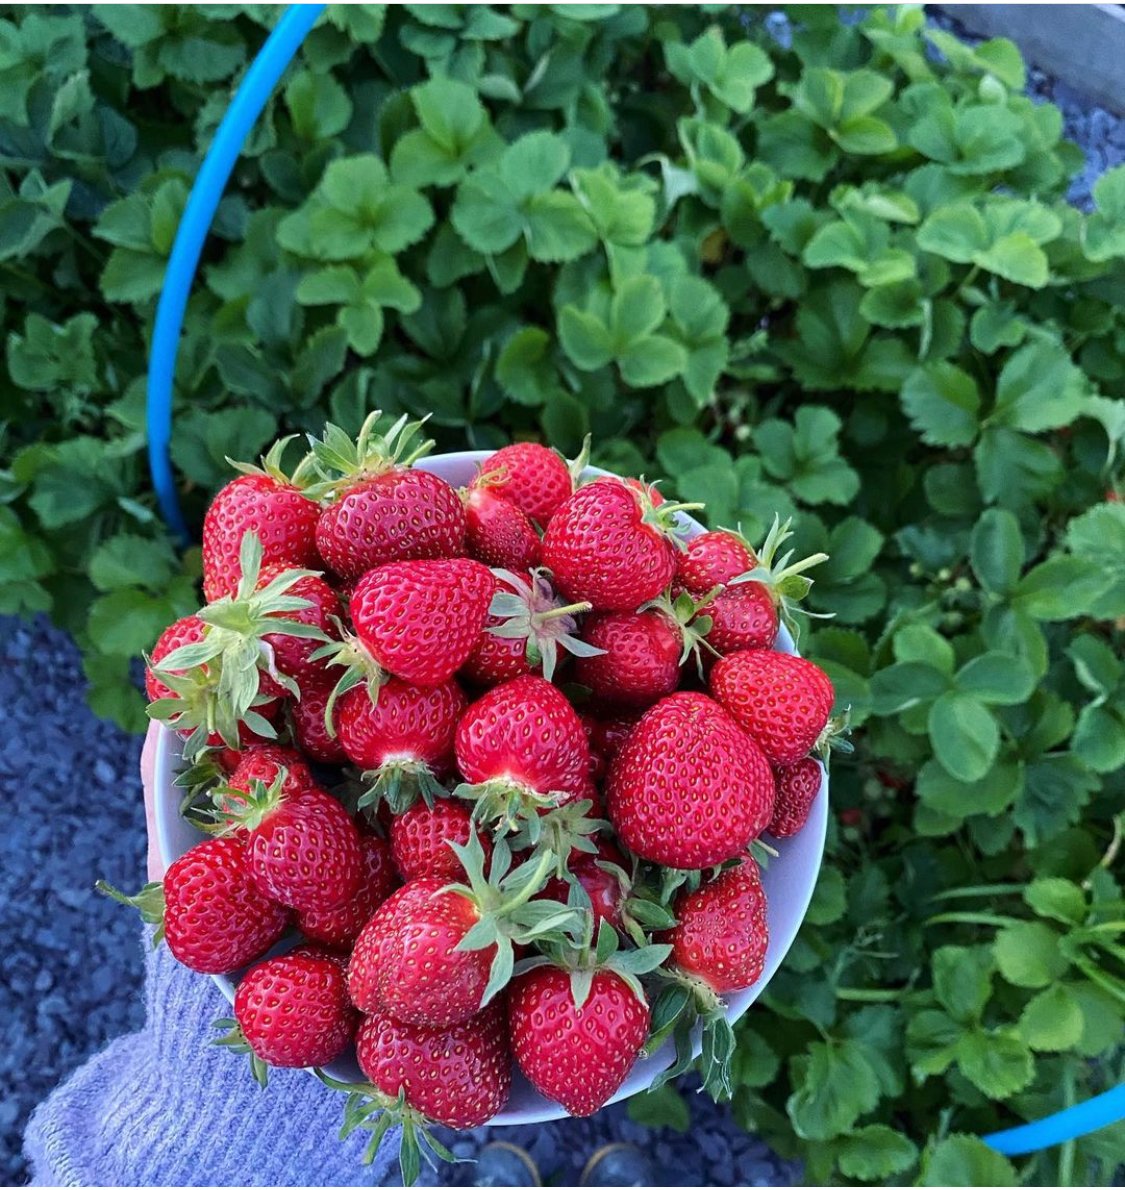 📸 PHOTO OF THE DAY - Strawberry haul from KG follower Suz!

#kitchengarden #growing #growyourown #gardening #plot #allotment #growyourownfood #allotmentsuk #homegrown #garden #gardenlove #gardeninspiration